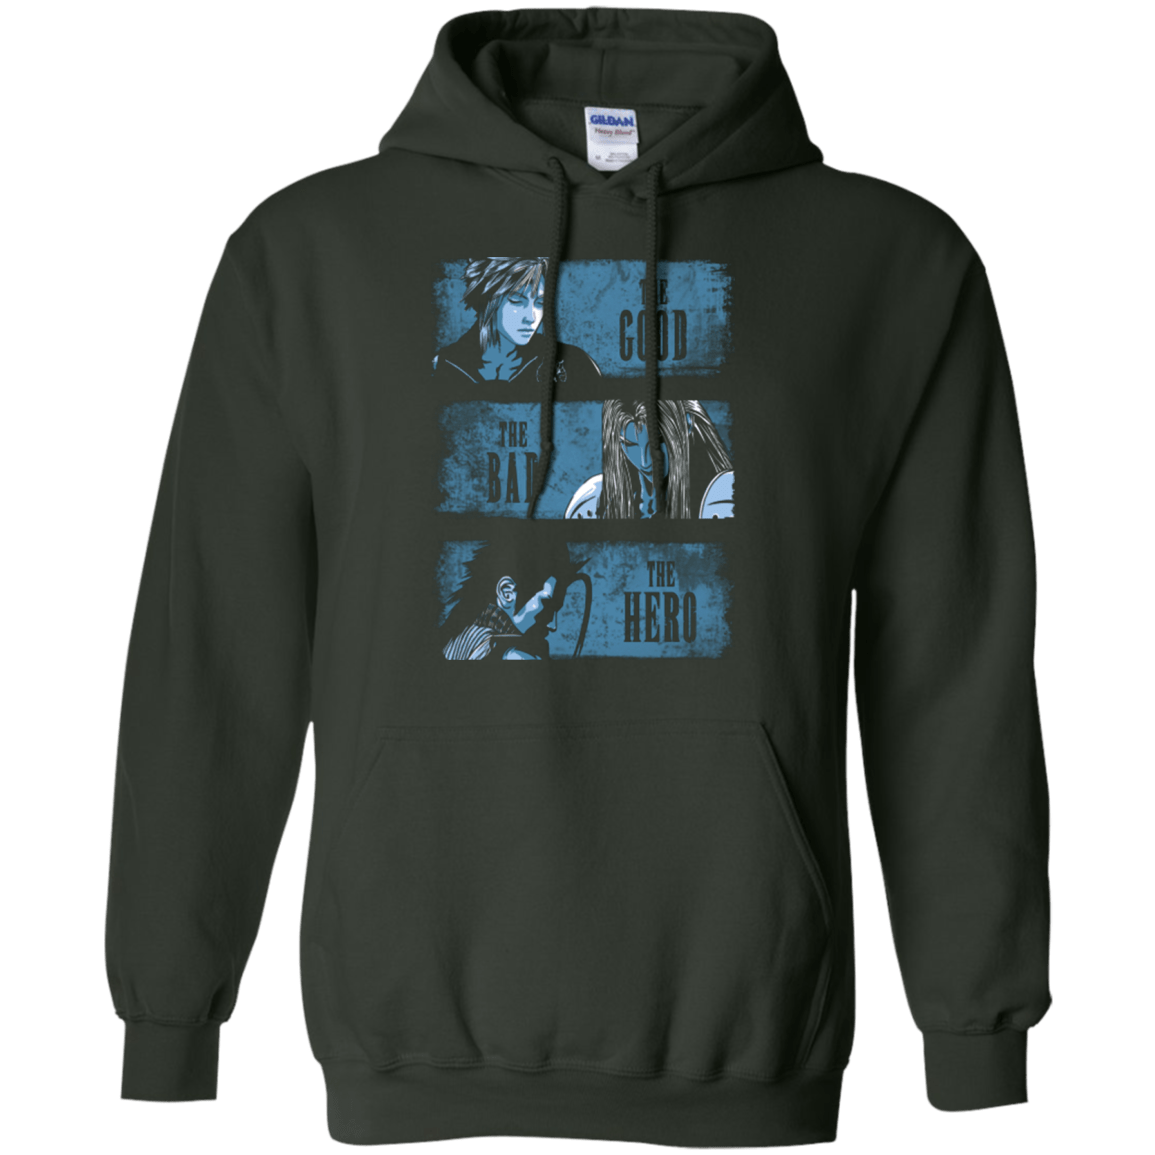 Sweatshirts Forest Green / Small The Good the Bad and the Hero Pullover Hoodie